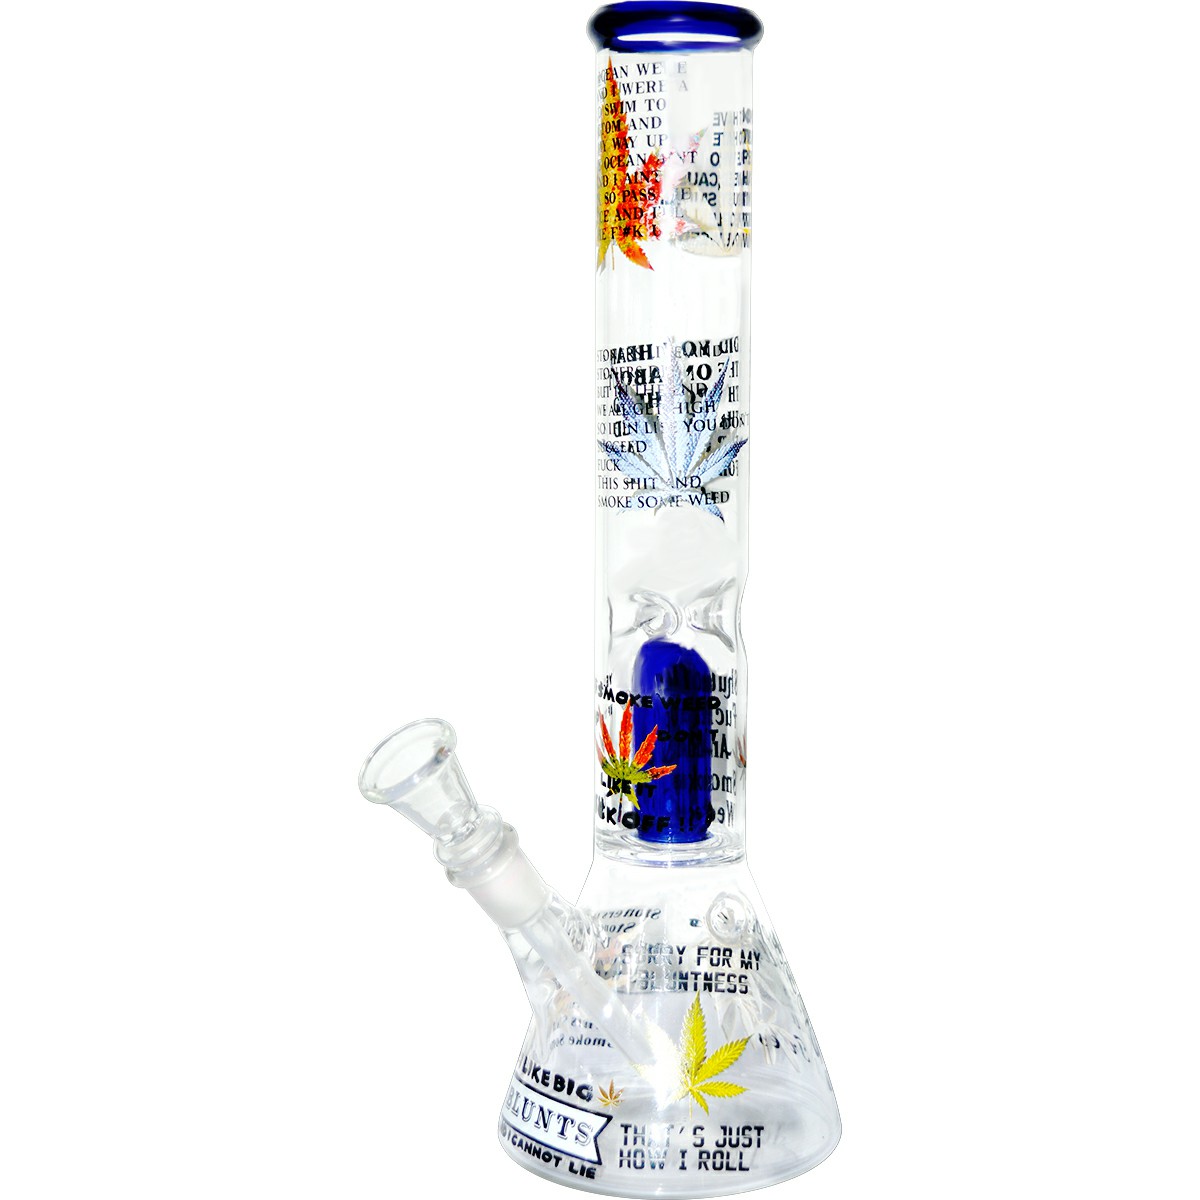 12 Inch Decal Print Glass Ice Bong 